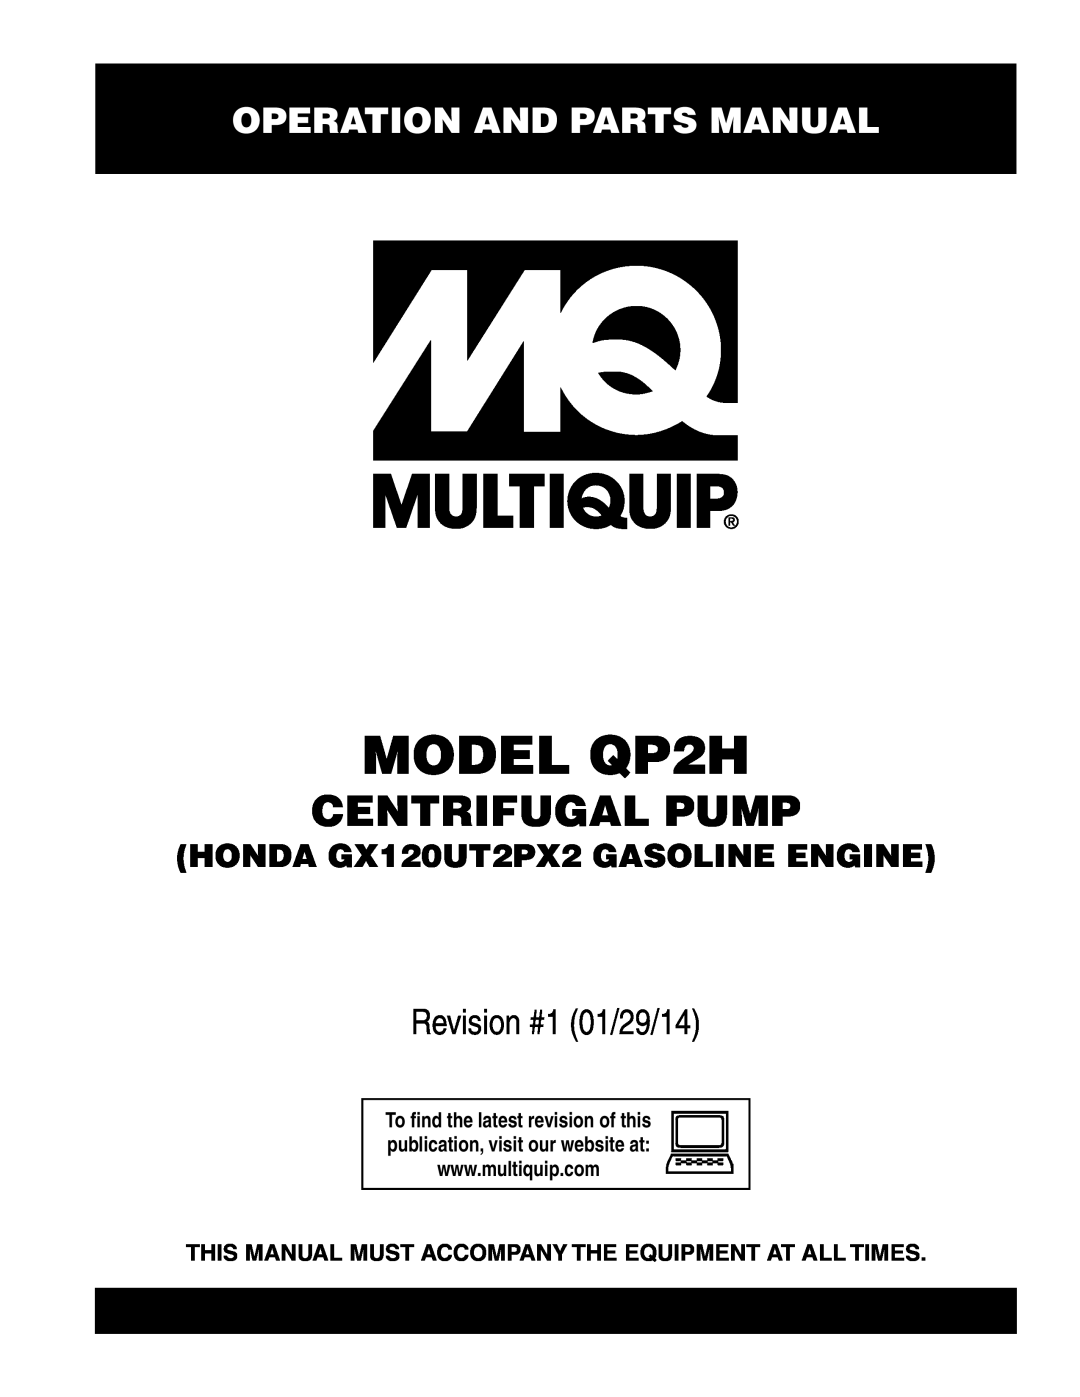 Multiquip manual Operation And Parts Manual, MODEL QP2H, Centrifugal Pump, Revision #0 08/04/08 